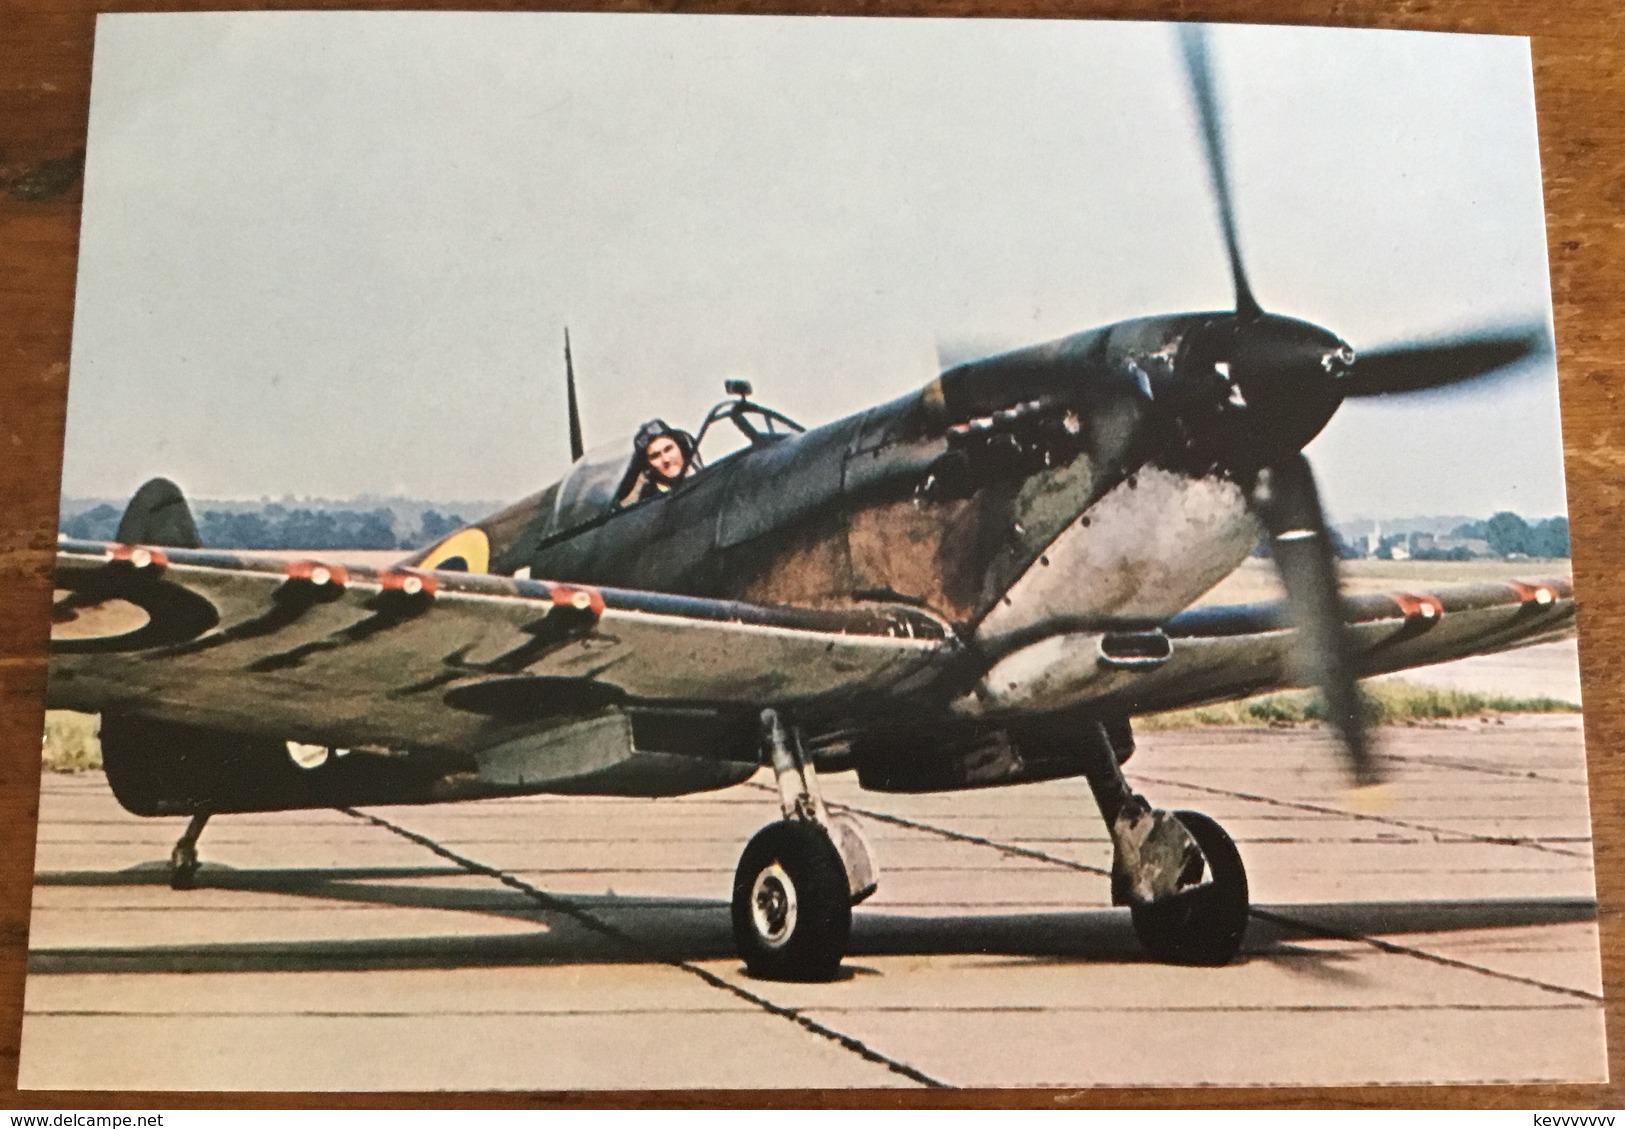 Vickers Armstrong Supermarine Spitfire F IX At Duxford During The Making Of The 1969 Film, Battle Of Britain. - 1939-1945: 2de Wereldoorlog